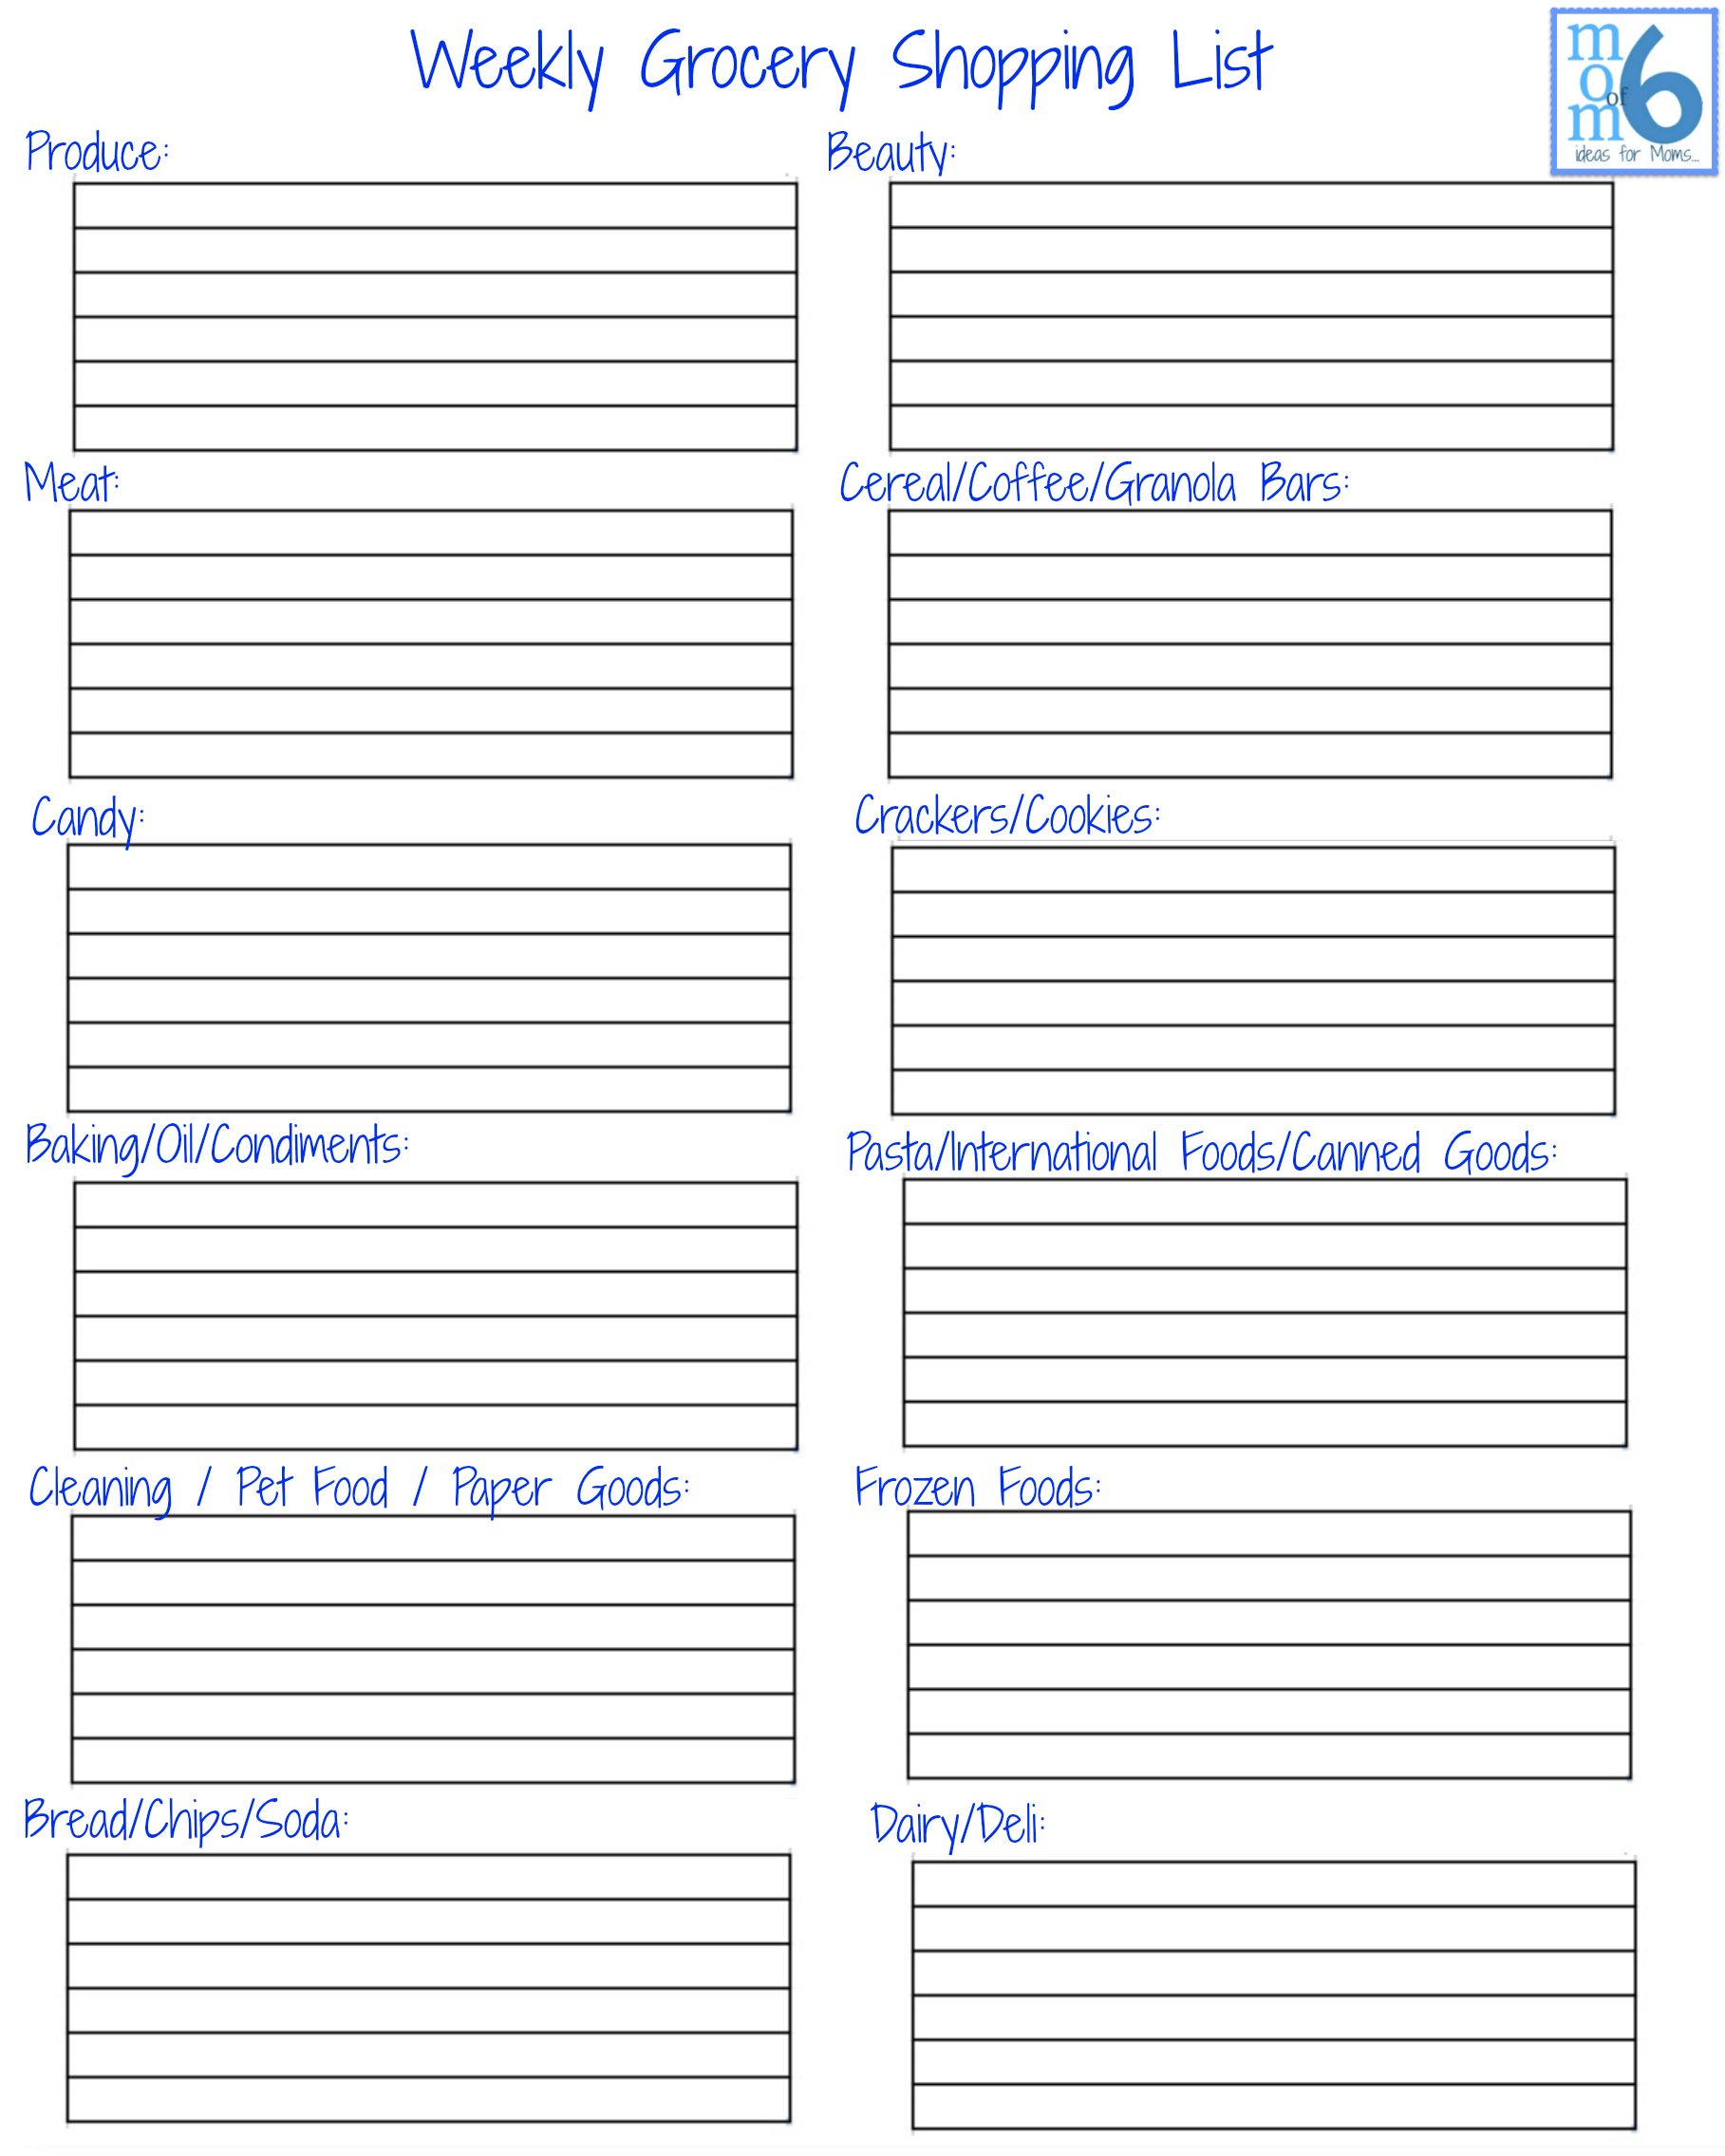 28-free-printable-grocery-list-templates-kitty-baby-love